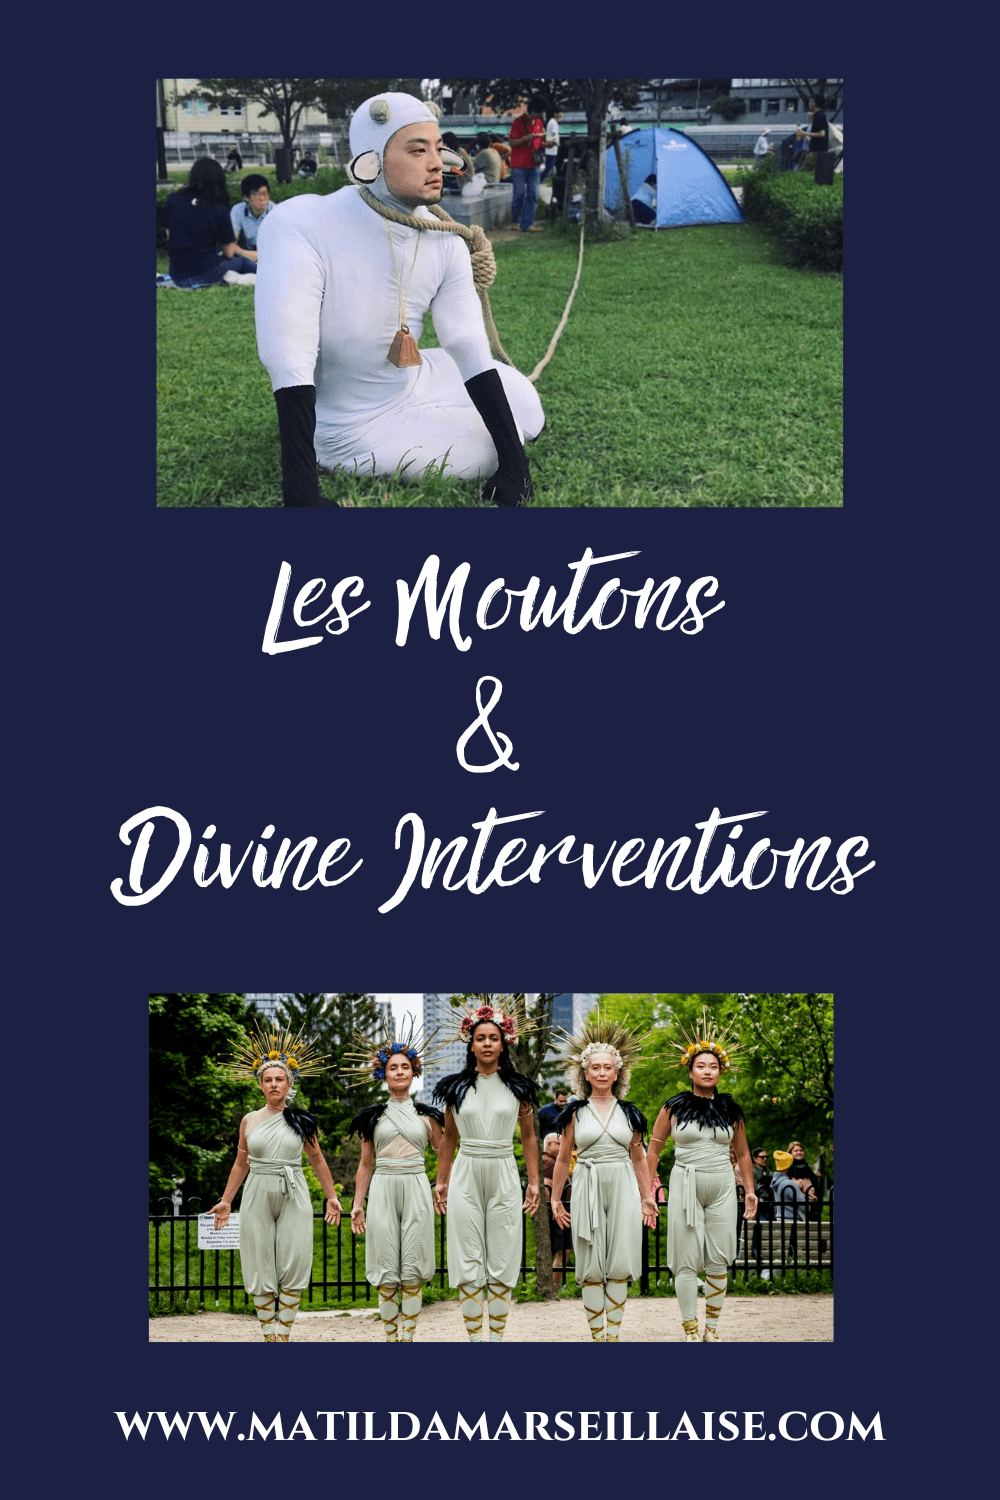 Canada’s Corpus brings its sheep and Goddesses to WOMADelaide this weekend with Les Moutons and Divine Interventions